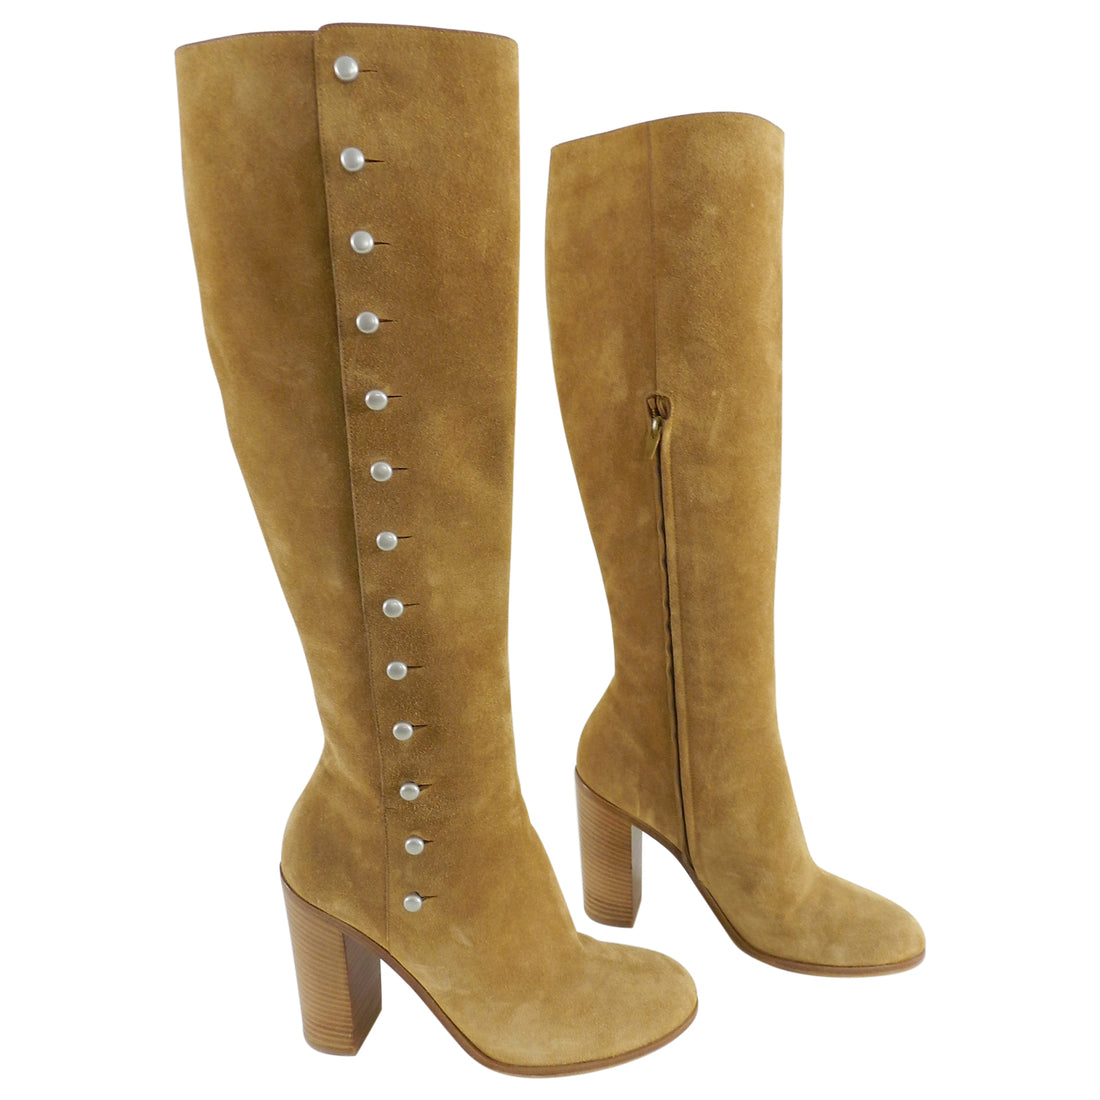 Margiela Tan Suede Buttoned Tall Boots - 40